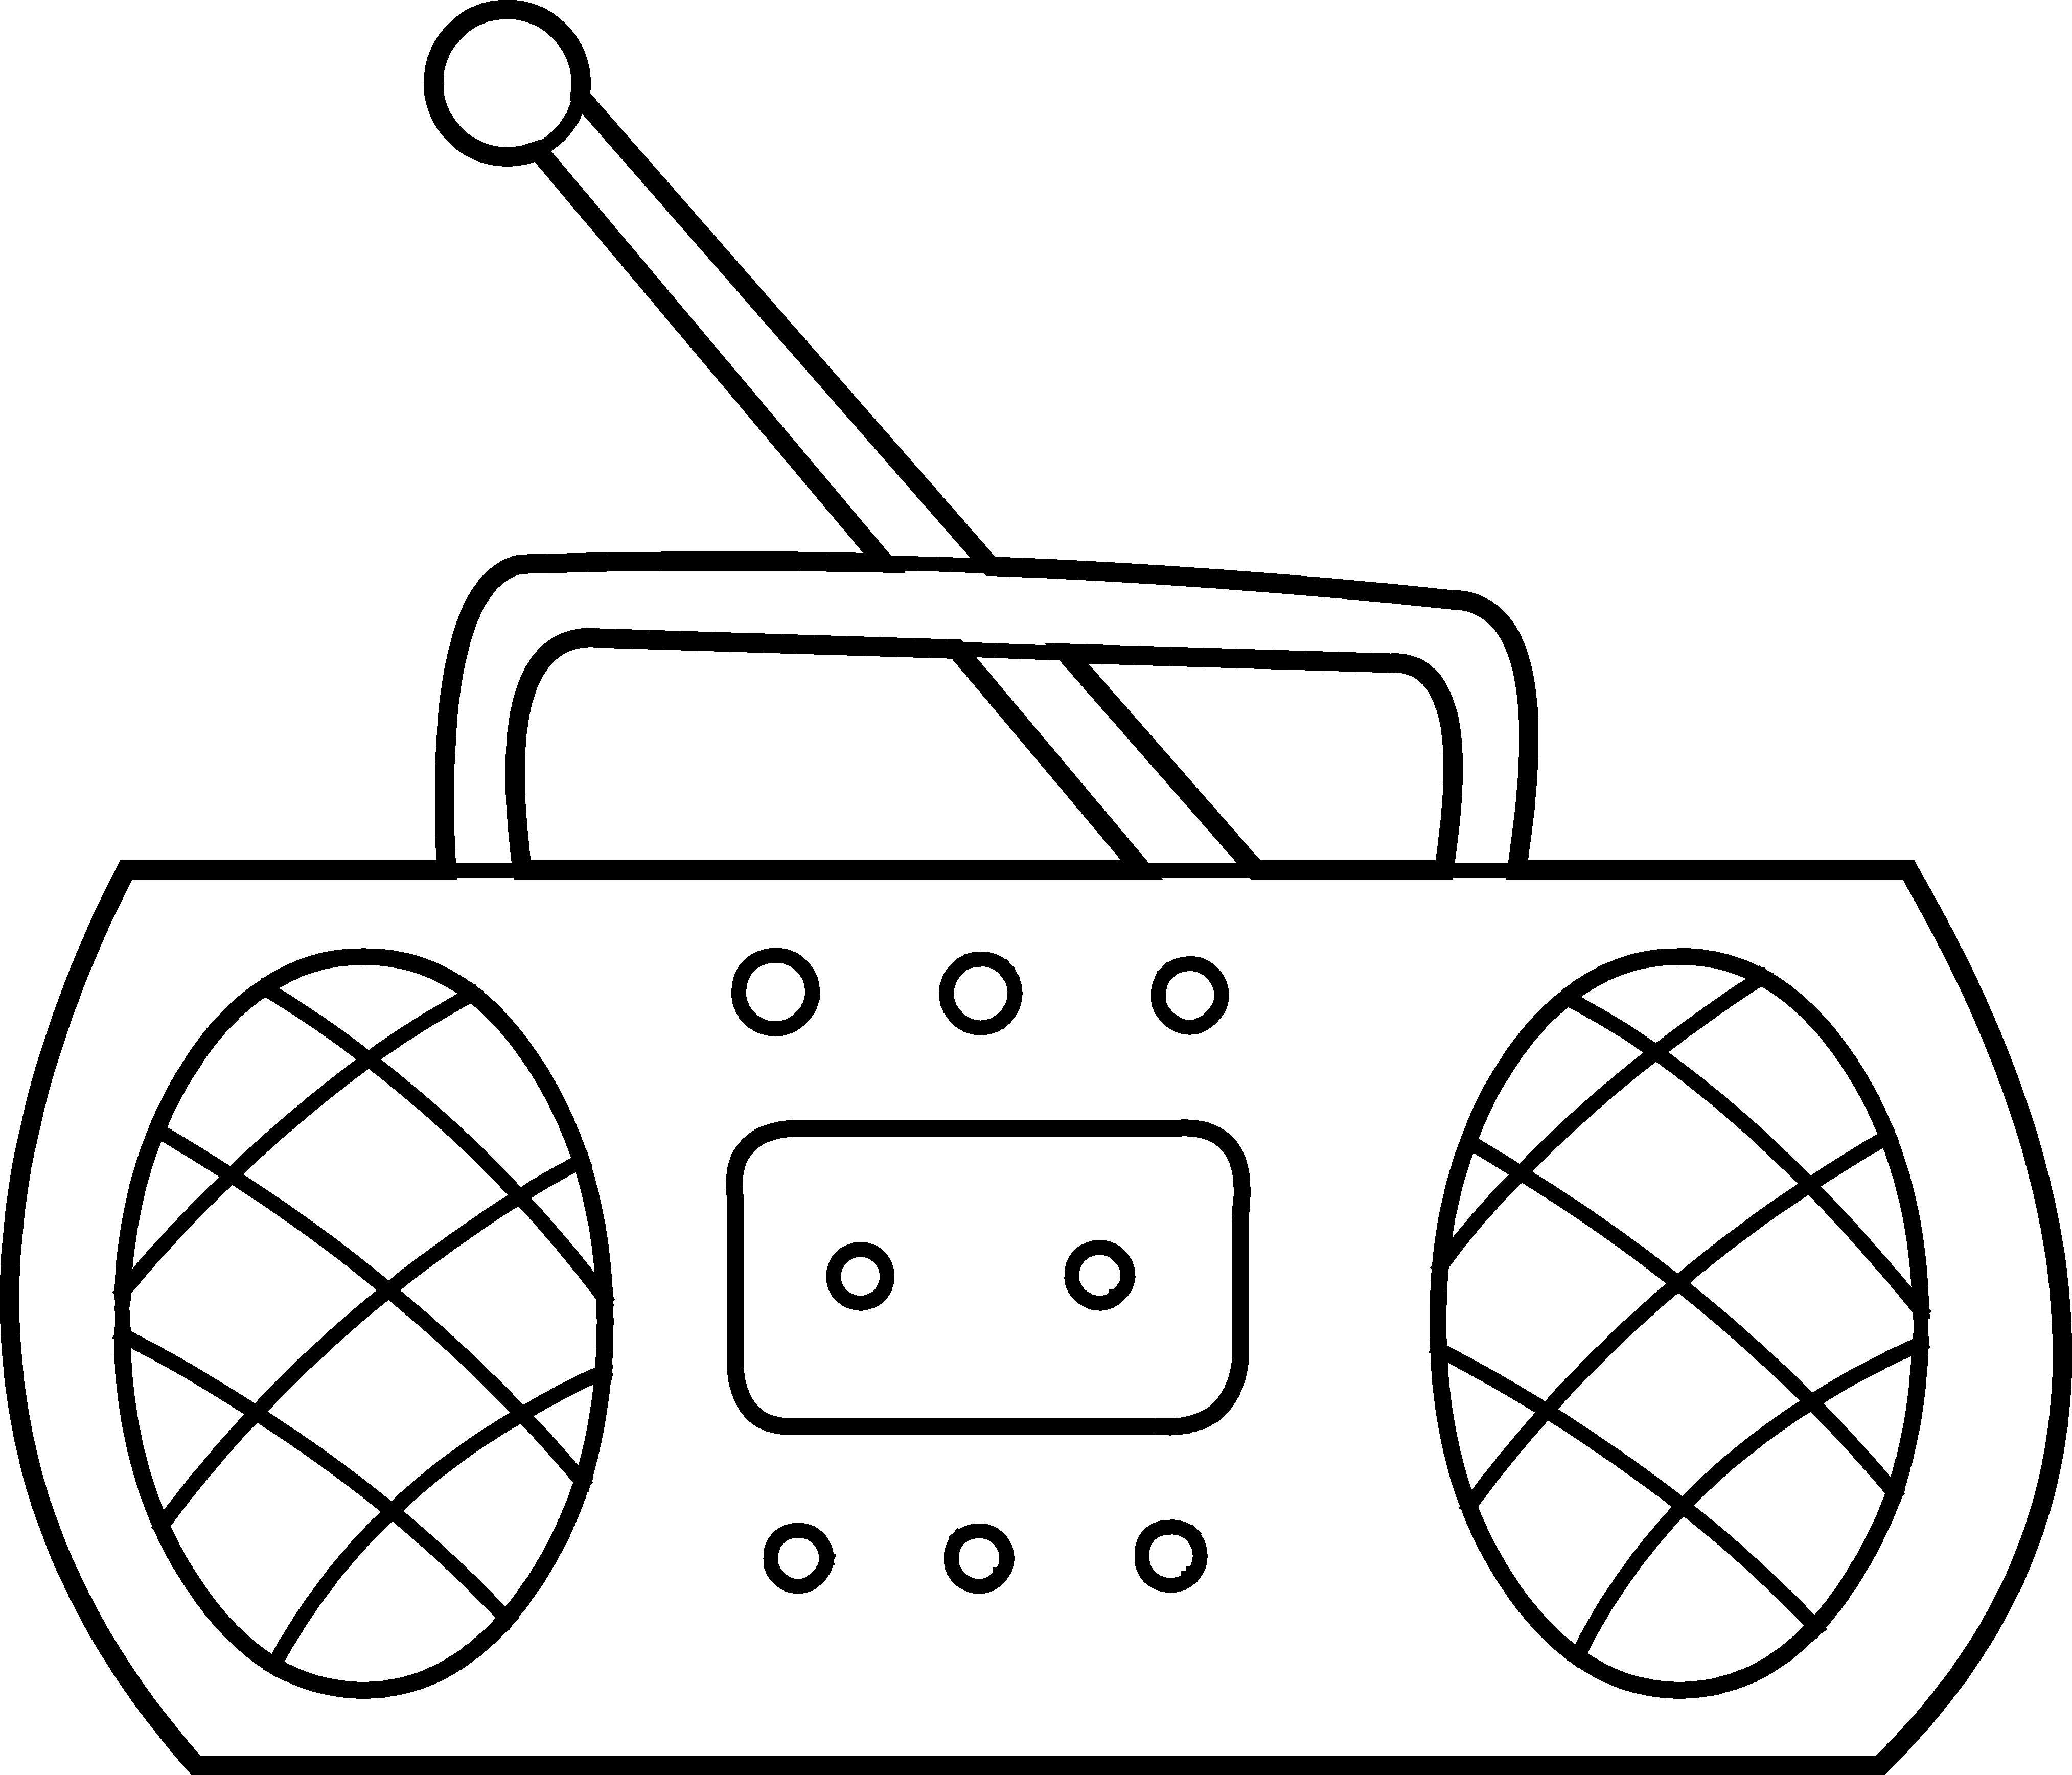 Radio coloring page free. 80's clipart black and white